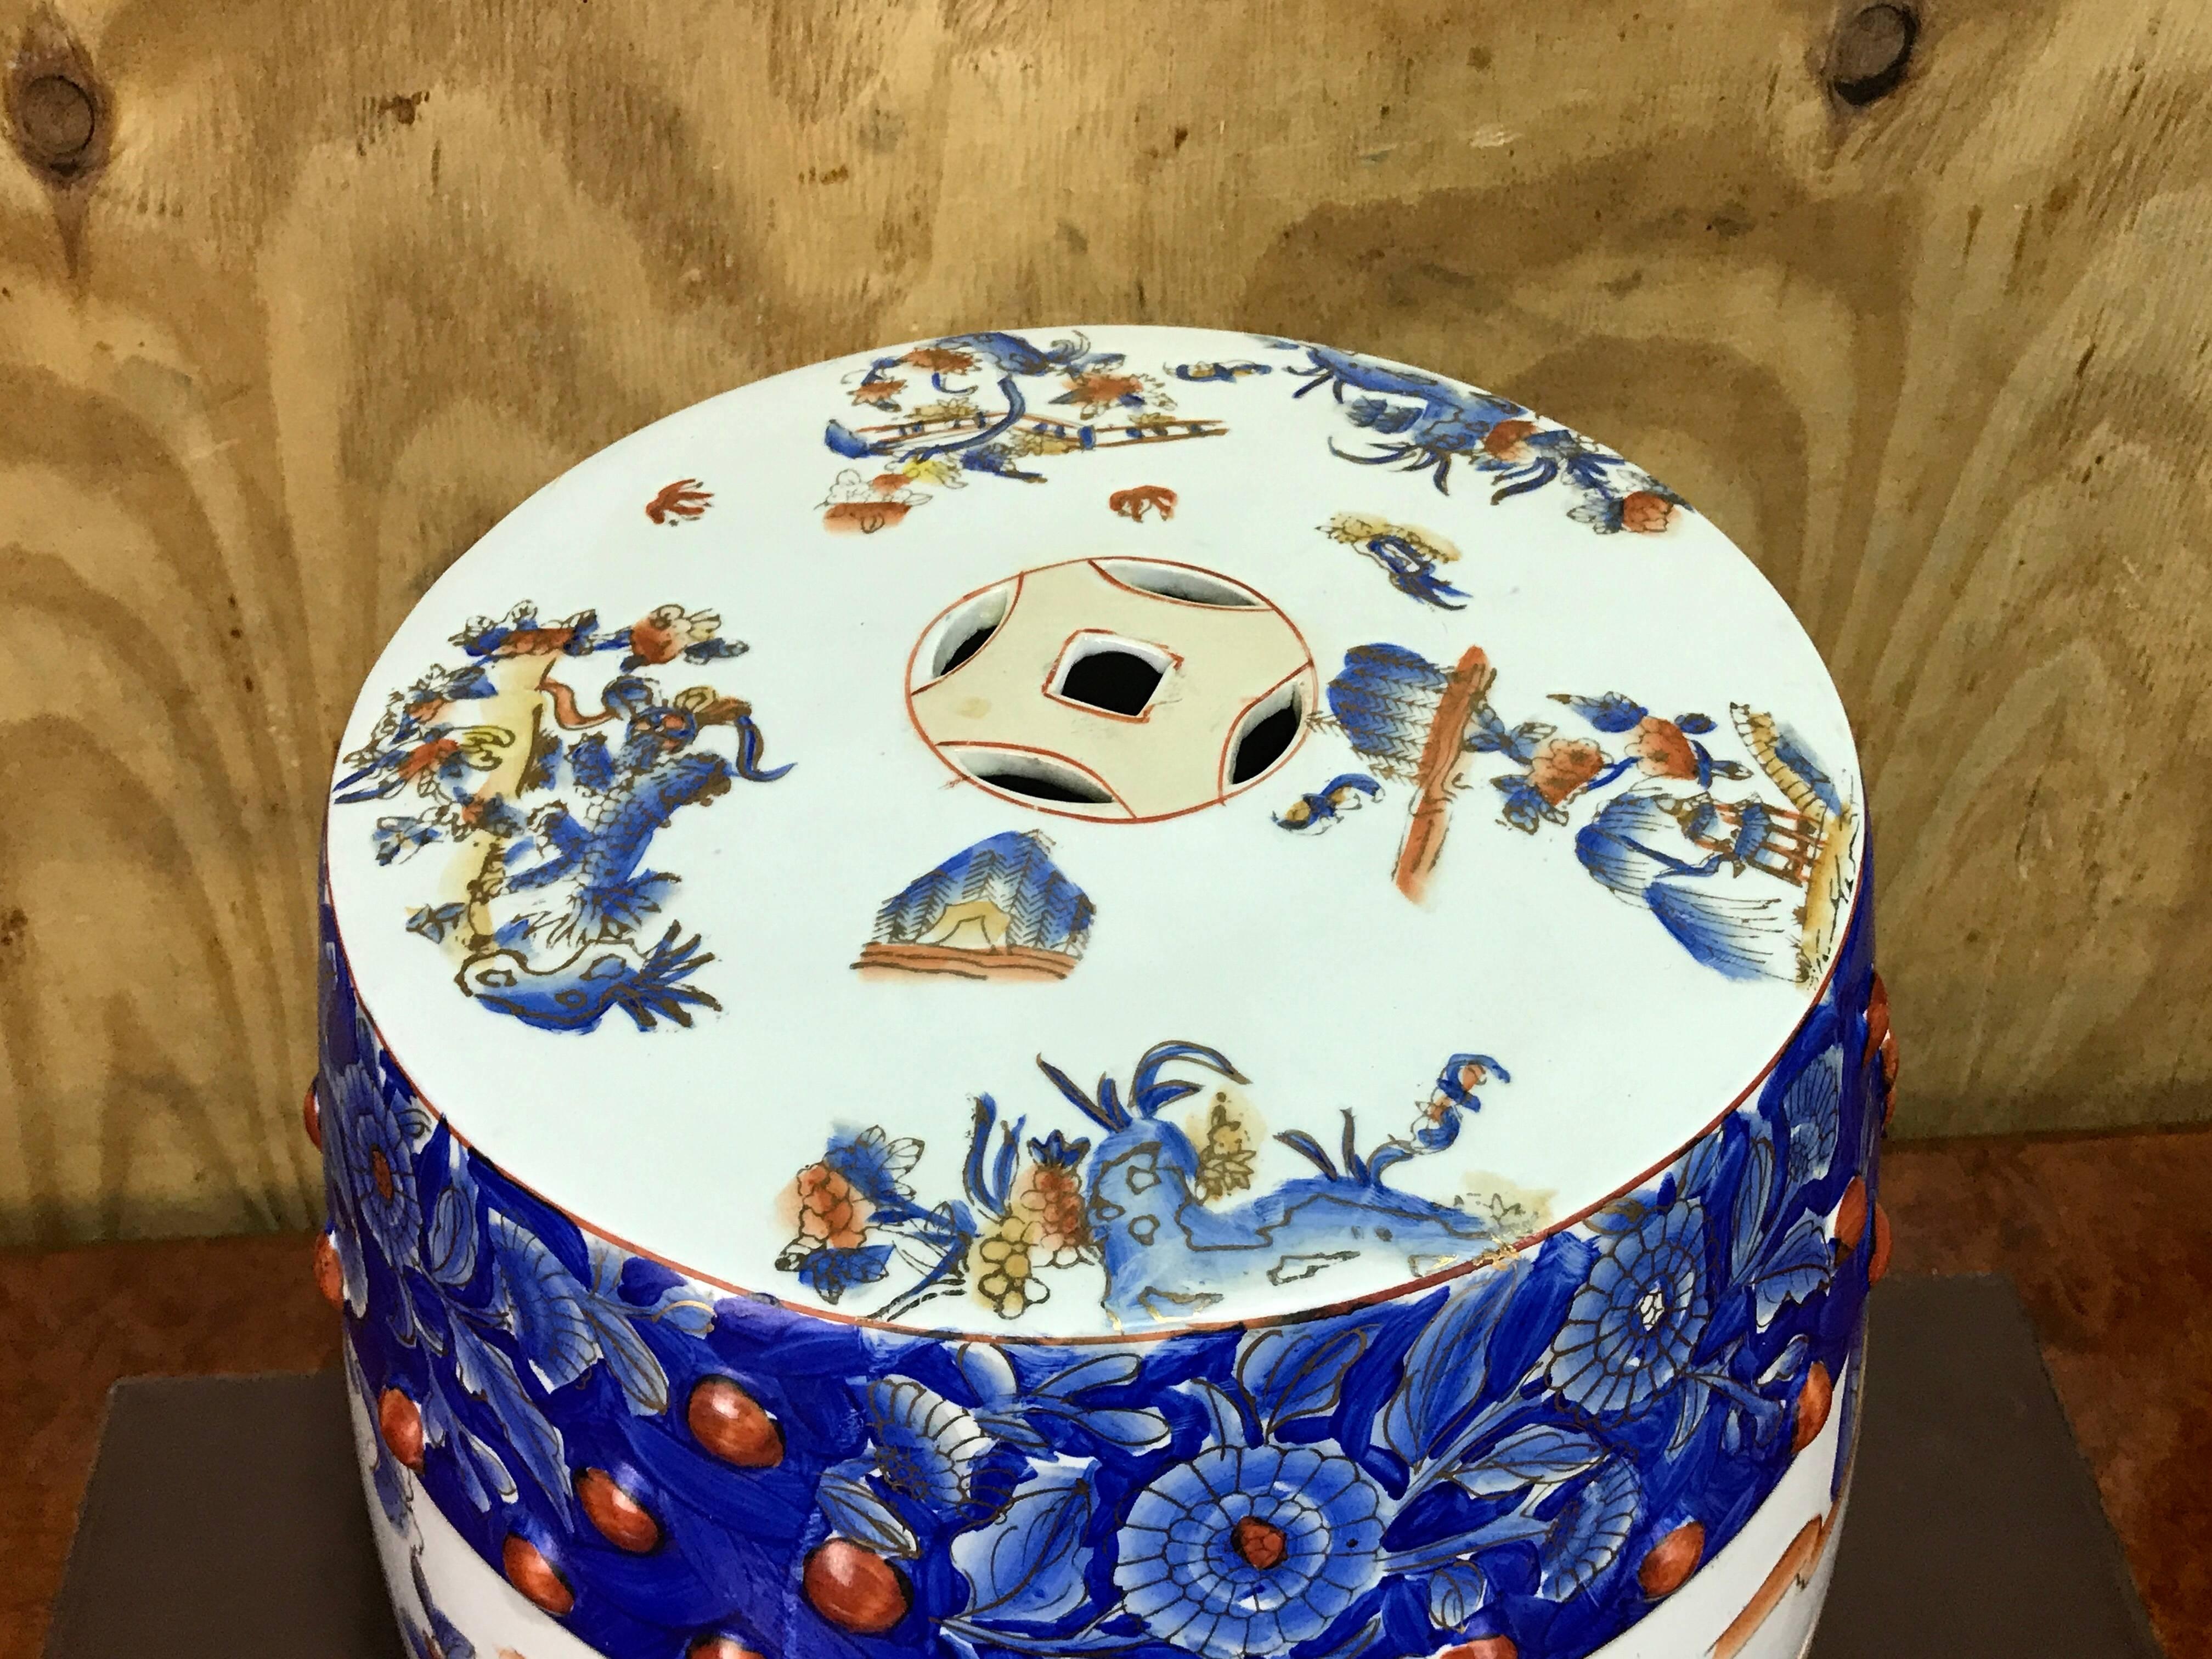 Painted Chinese Export Garden Seat, in the Style of Masons Ironstone